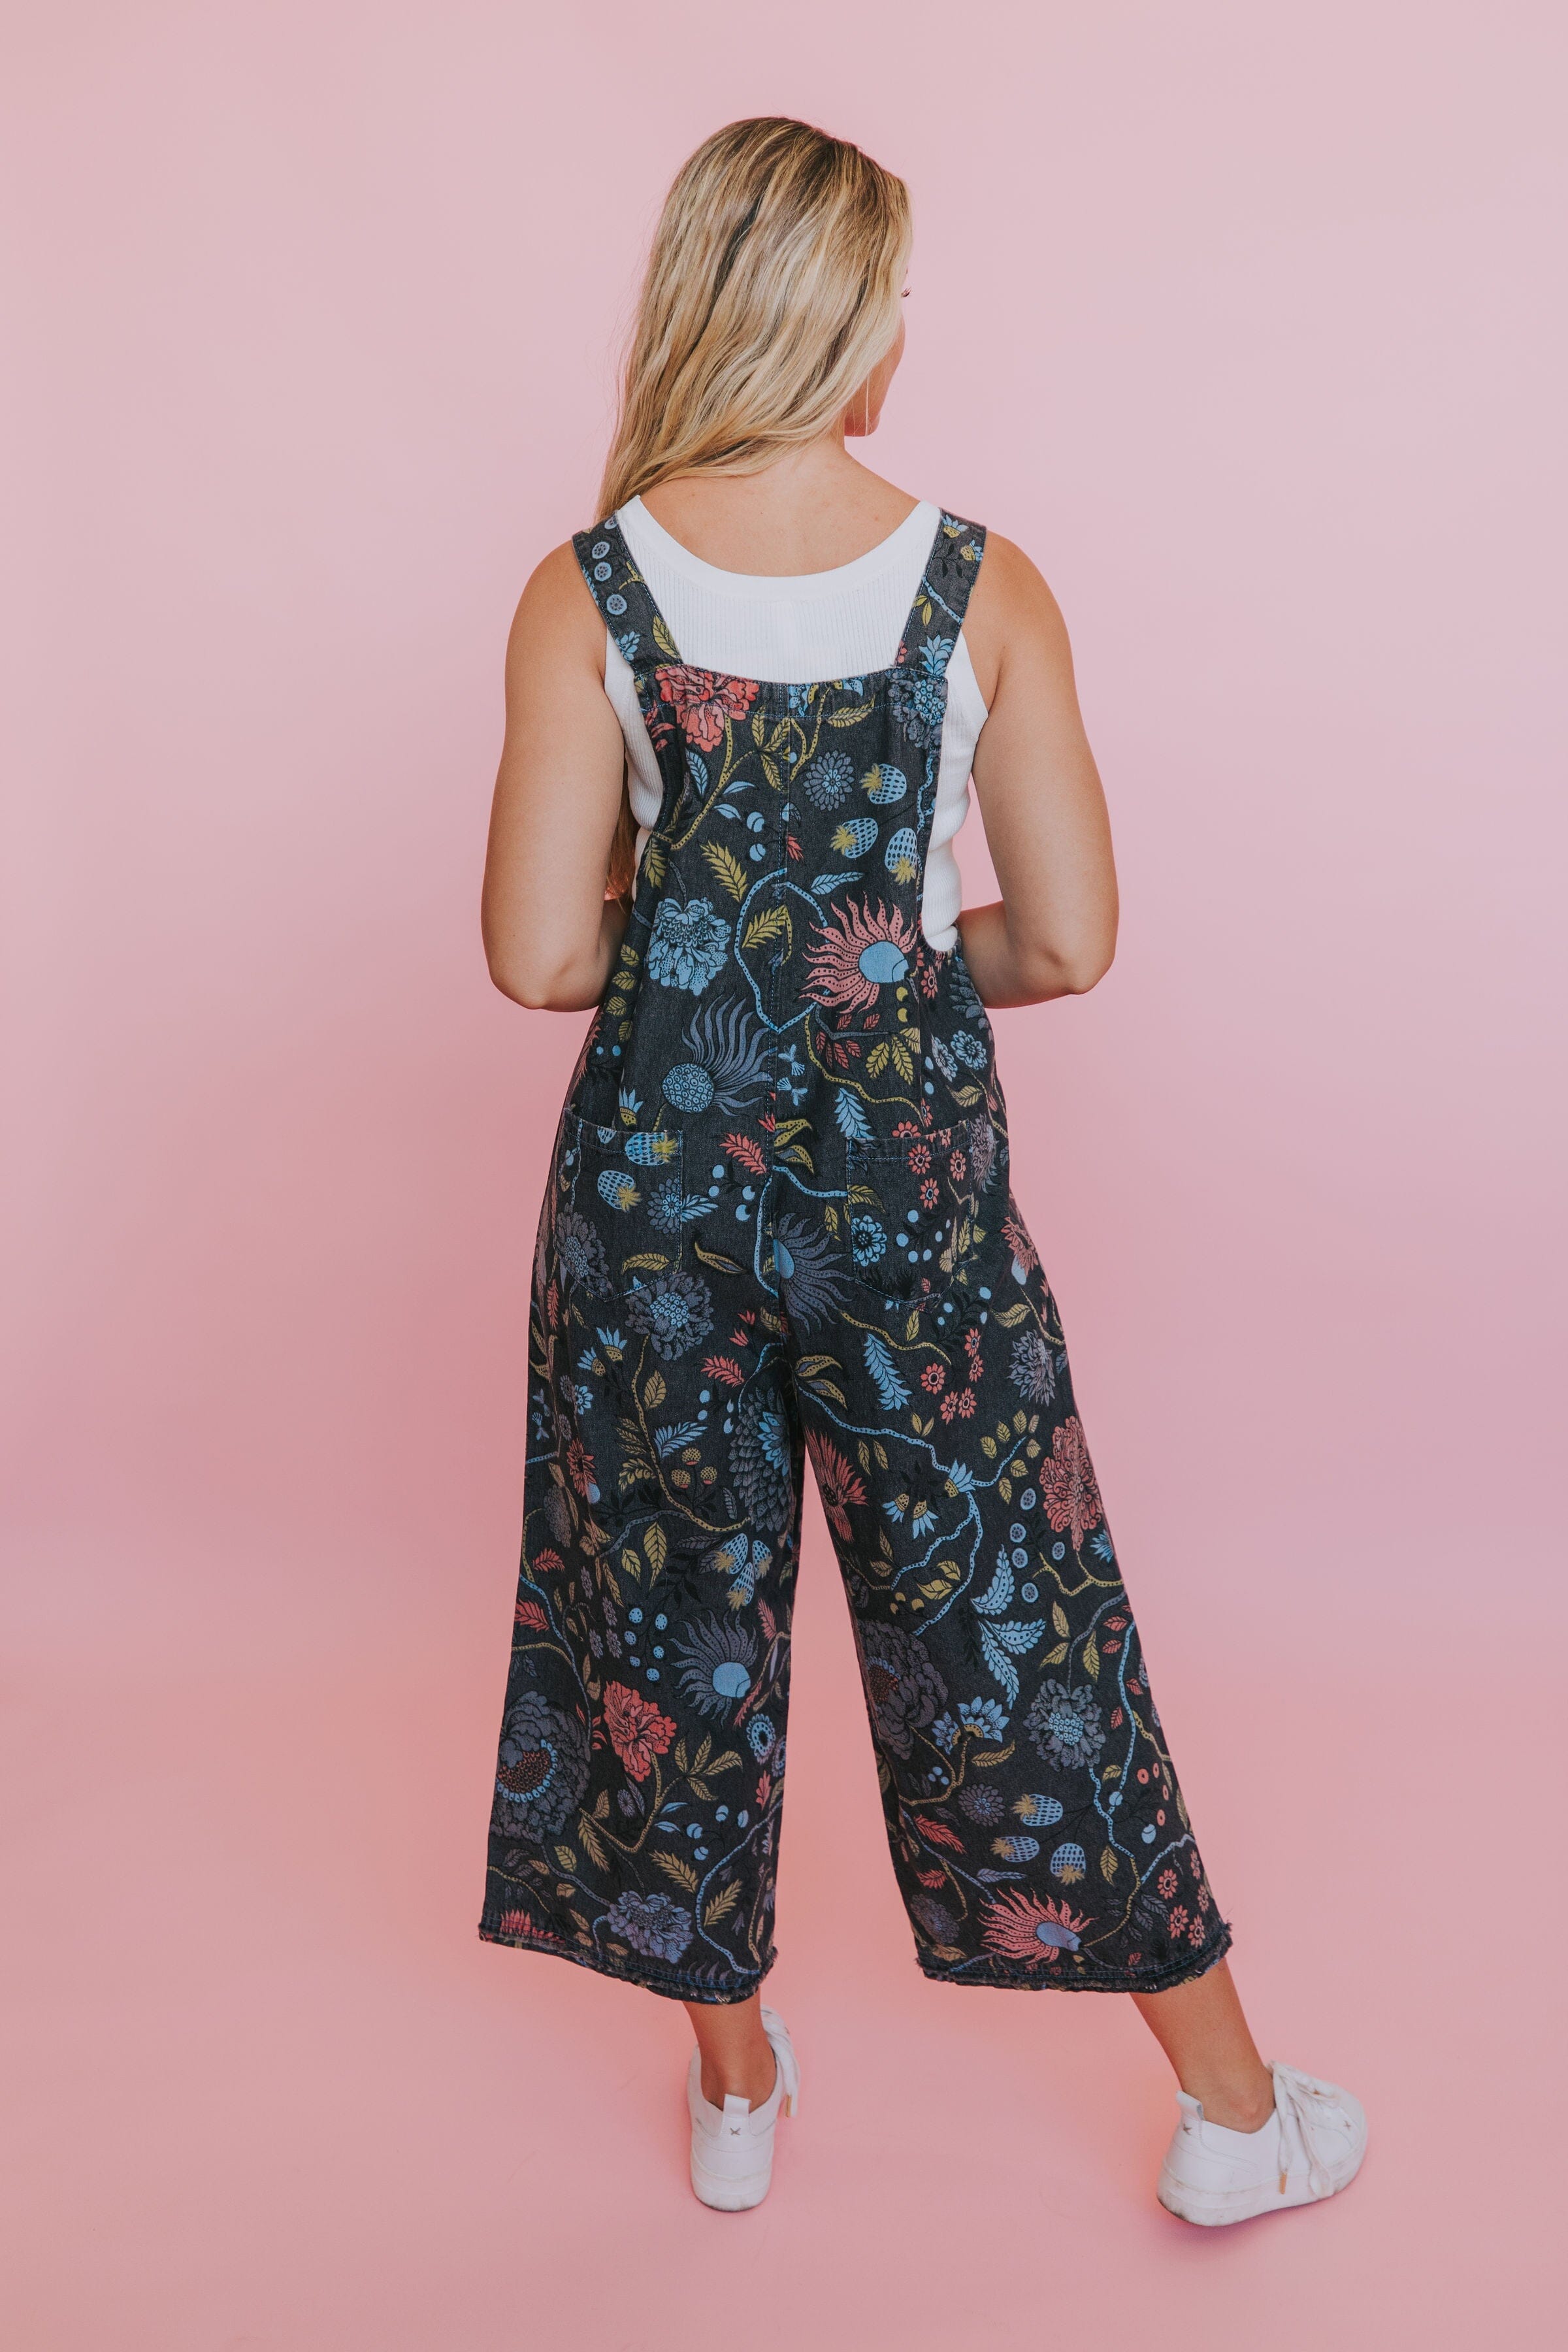 Lonnie Overalls - 2 Colors!